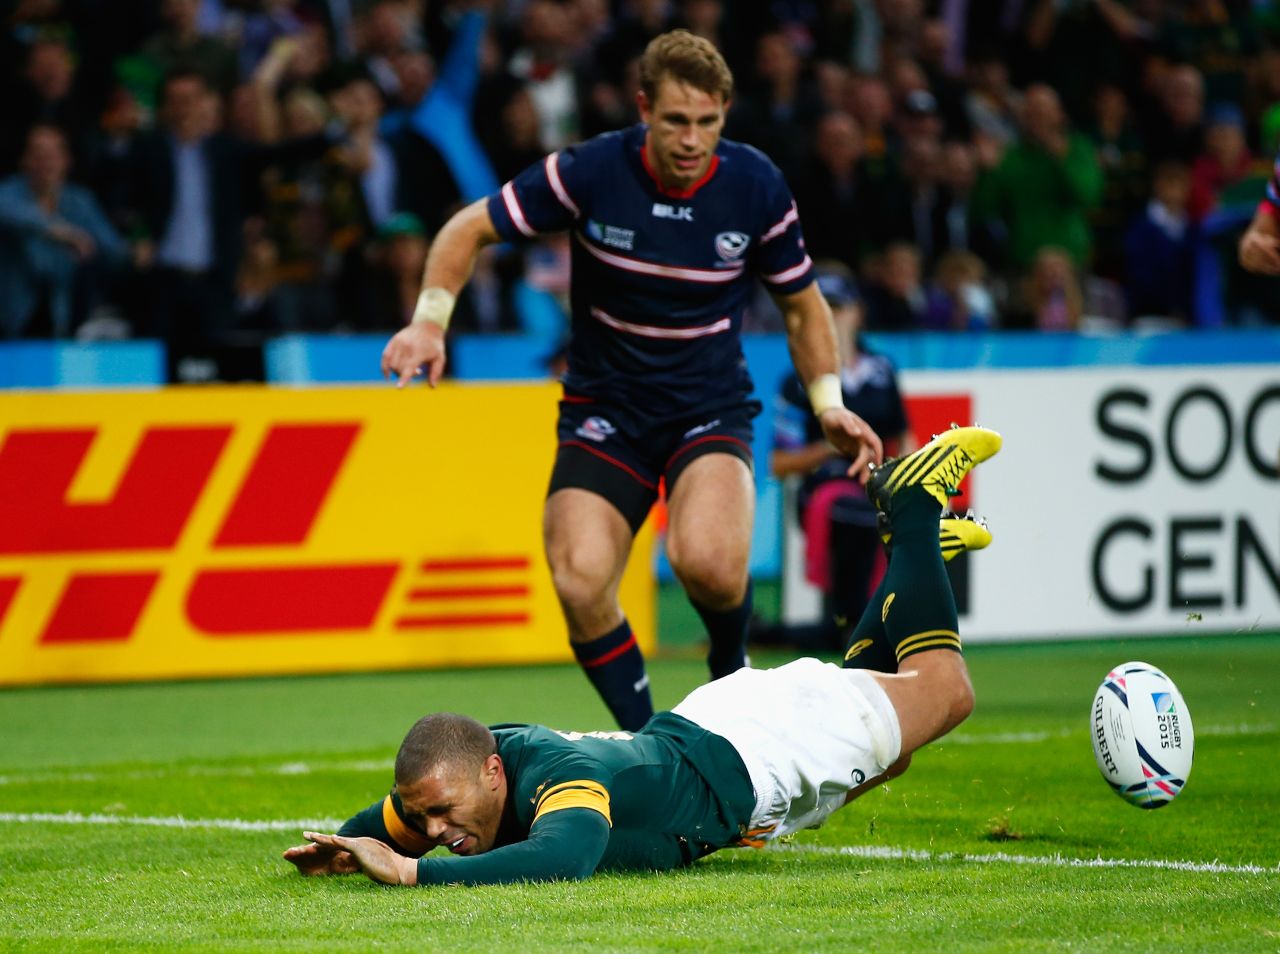 He had the chance to become the World Cup's all-time leading try scorer on 16, but spilled the ball over the line when trying to land his fourth score of the match against the U.S. at the 2015 tournament.